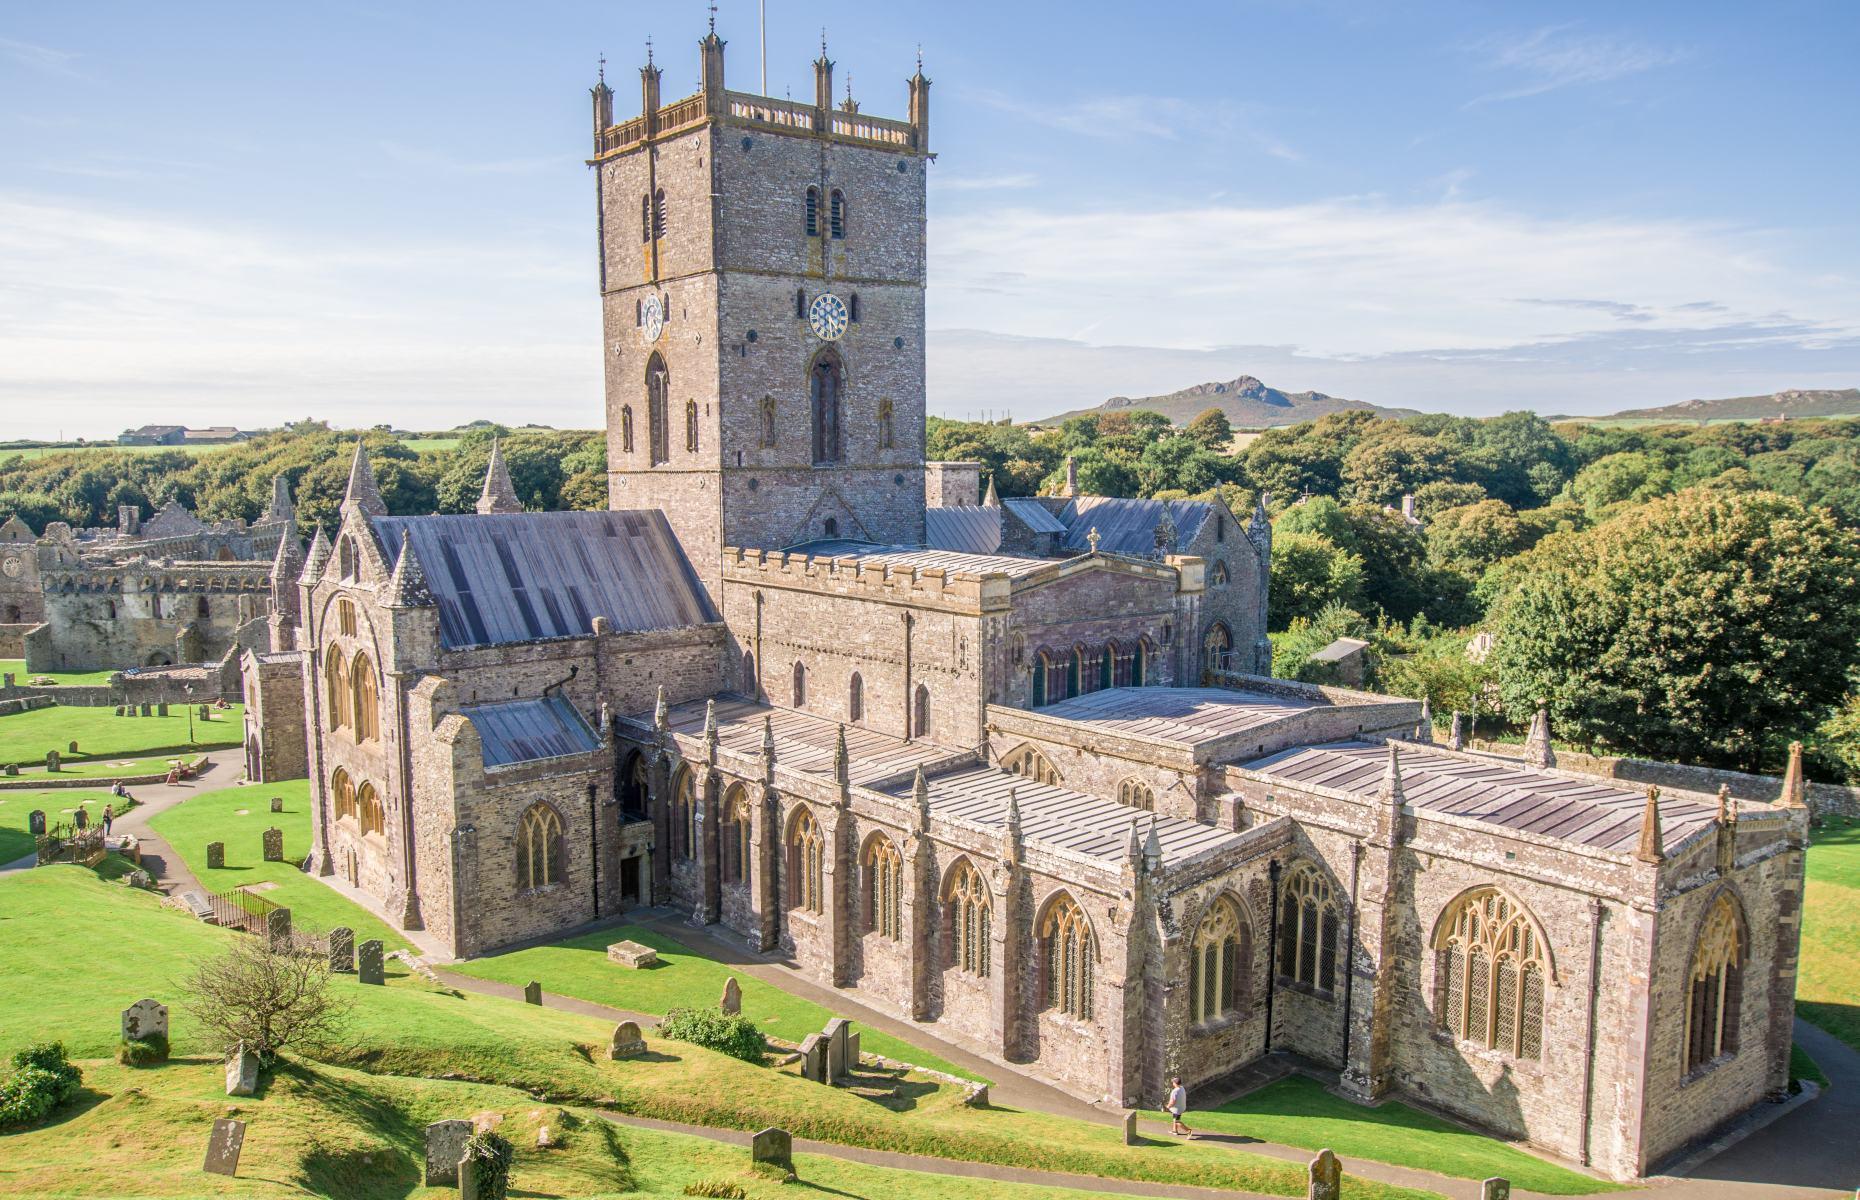 <p>Rising above the tiny city of <a href="https://www.loveexploring.com/news/72215/st-davids-wales-what-to-see-do-in-britains-smallest-city">St Davids</a>, this glorious cathedral in Pembrokeshire is thought to be one of the greatest religious sites in Wales. A place steeped in history, the present 12th-century structure stands where St Davids founded a monastery around AD 600. With its gorgeous architecture, historic artwork and magnificent chapel, St Davids Cathedral is a real highlight of Britain’s smallest city. </p>